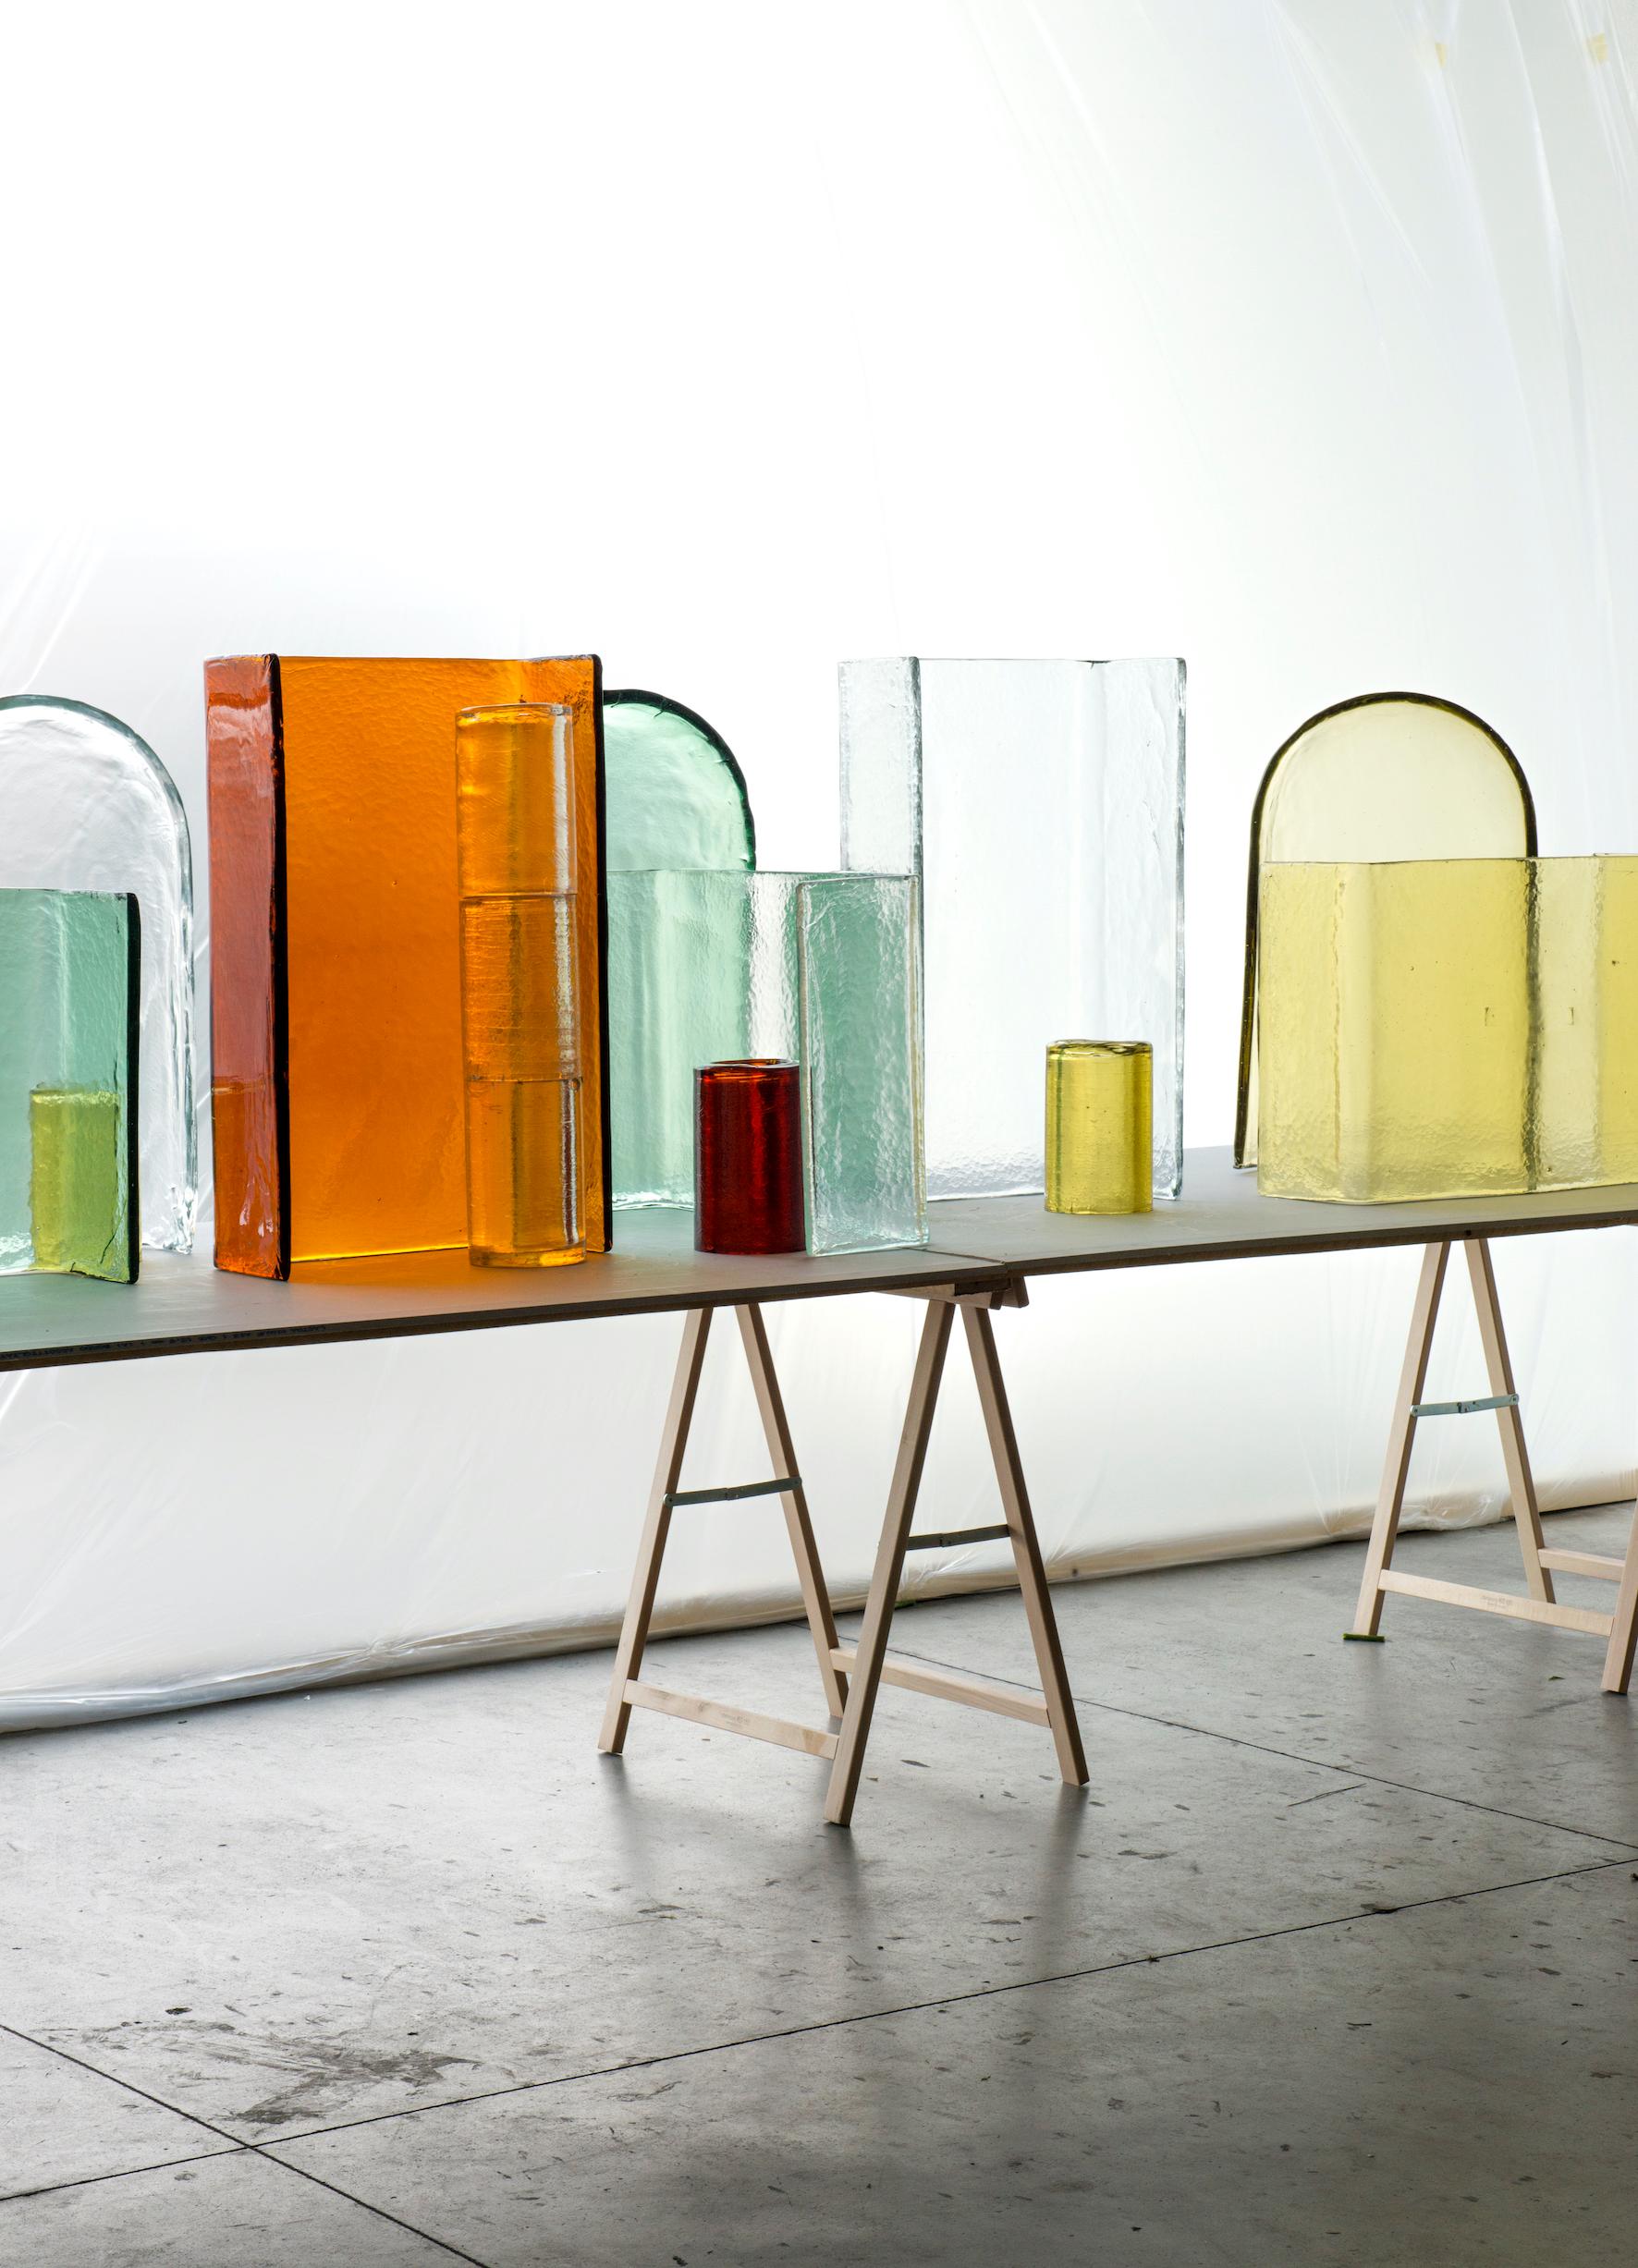 Alcova set 02
1 x Alcova Light Amber
1 x Vaso L Crystal
1 x Cilindro L Light Amber

Alcova is a collection of handcrafted, geometric objects that when grouped create intimate landscapes. Ronan and Erwan Bouroullec describe the collection as